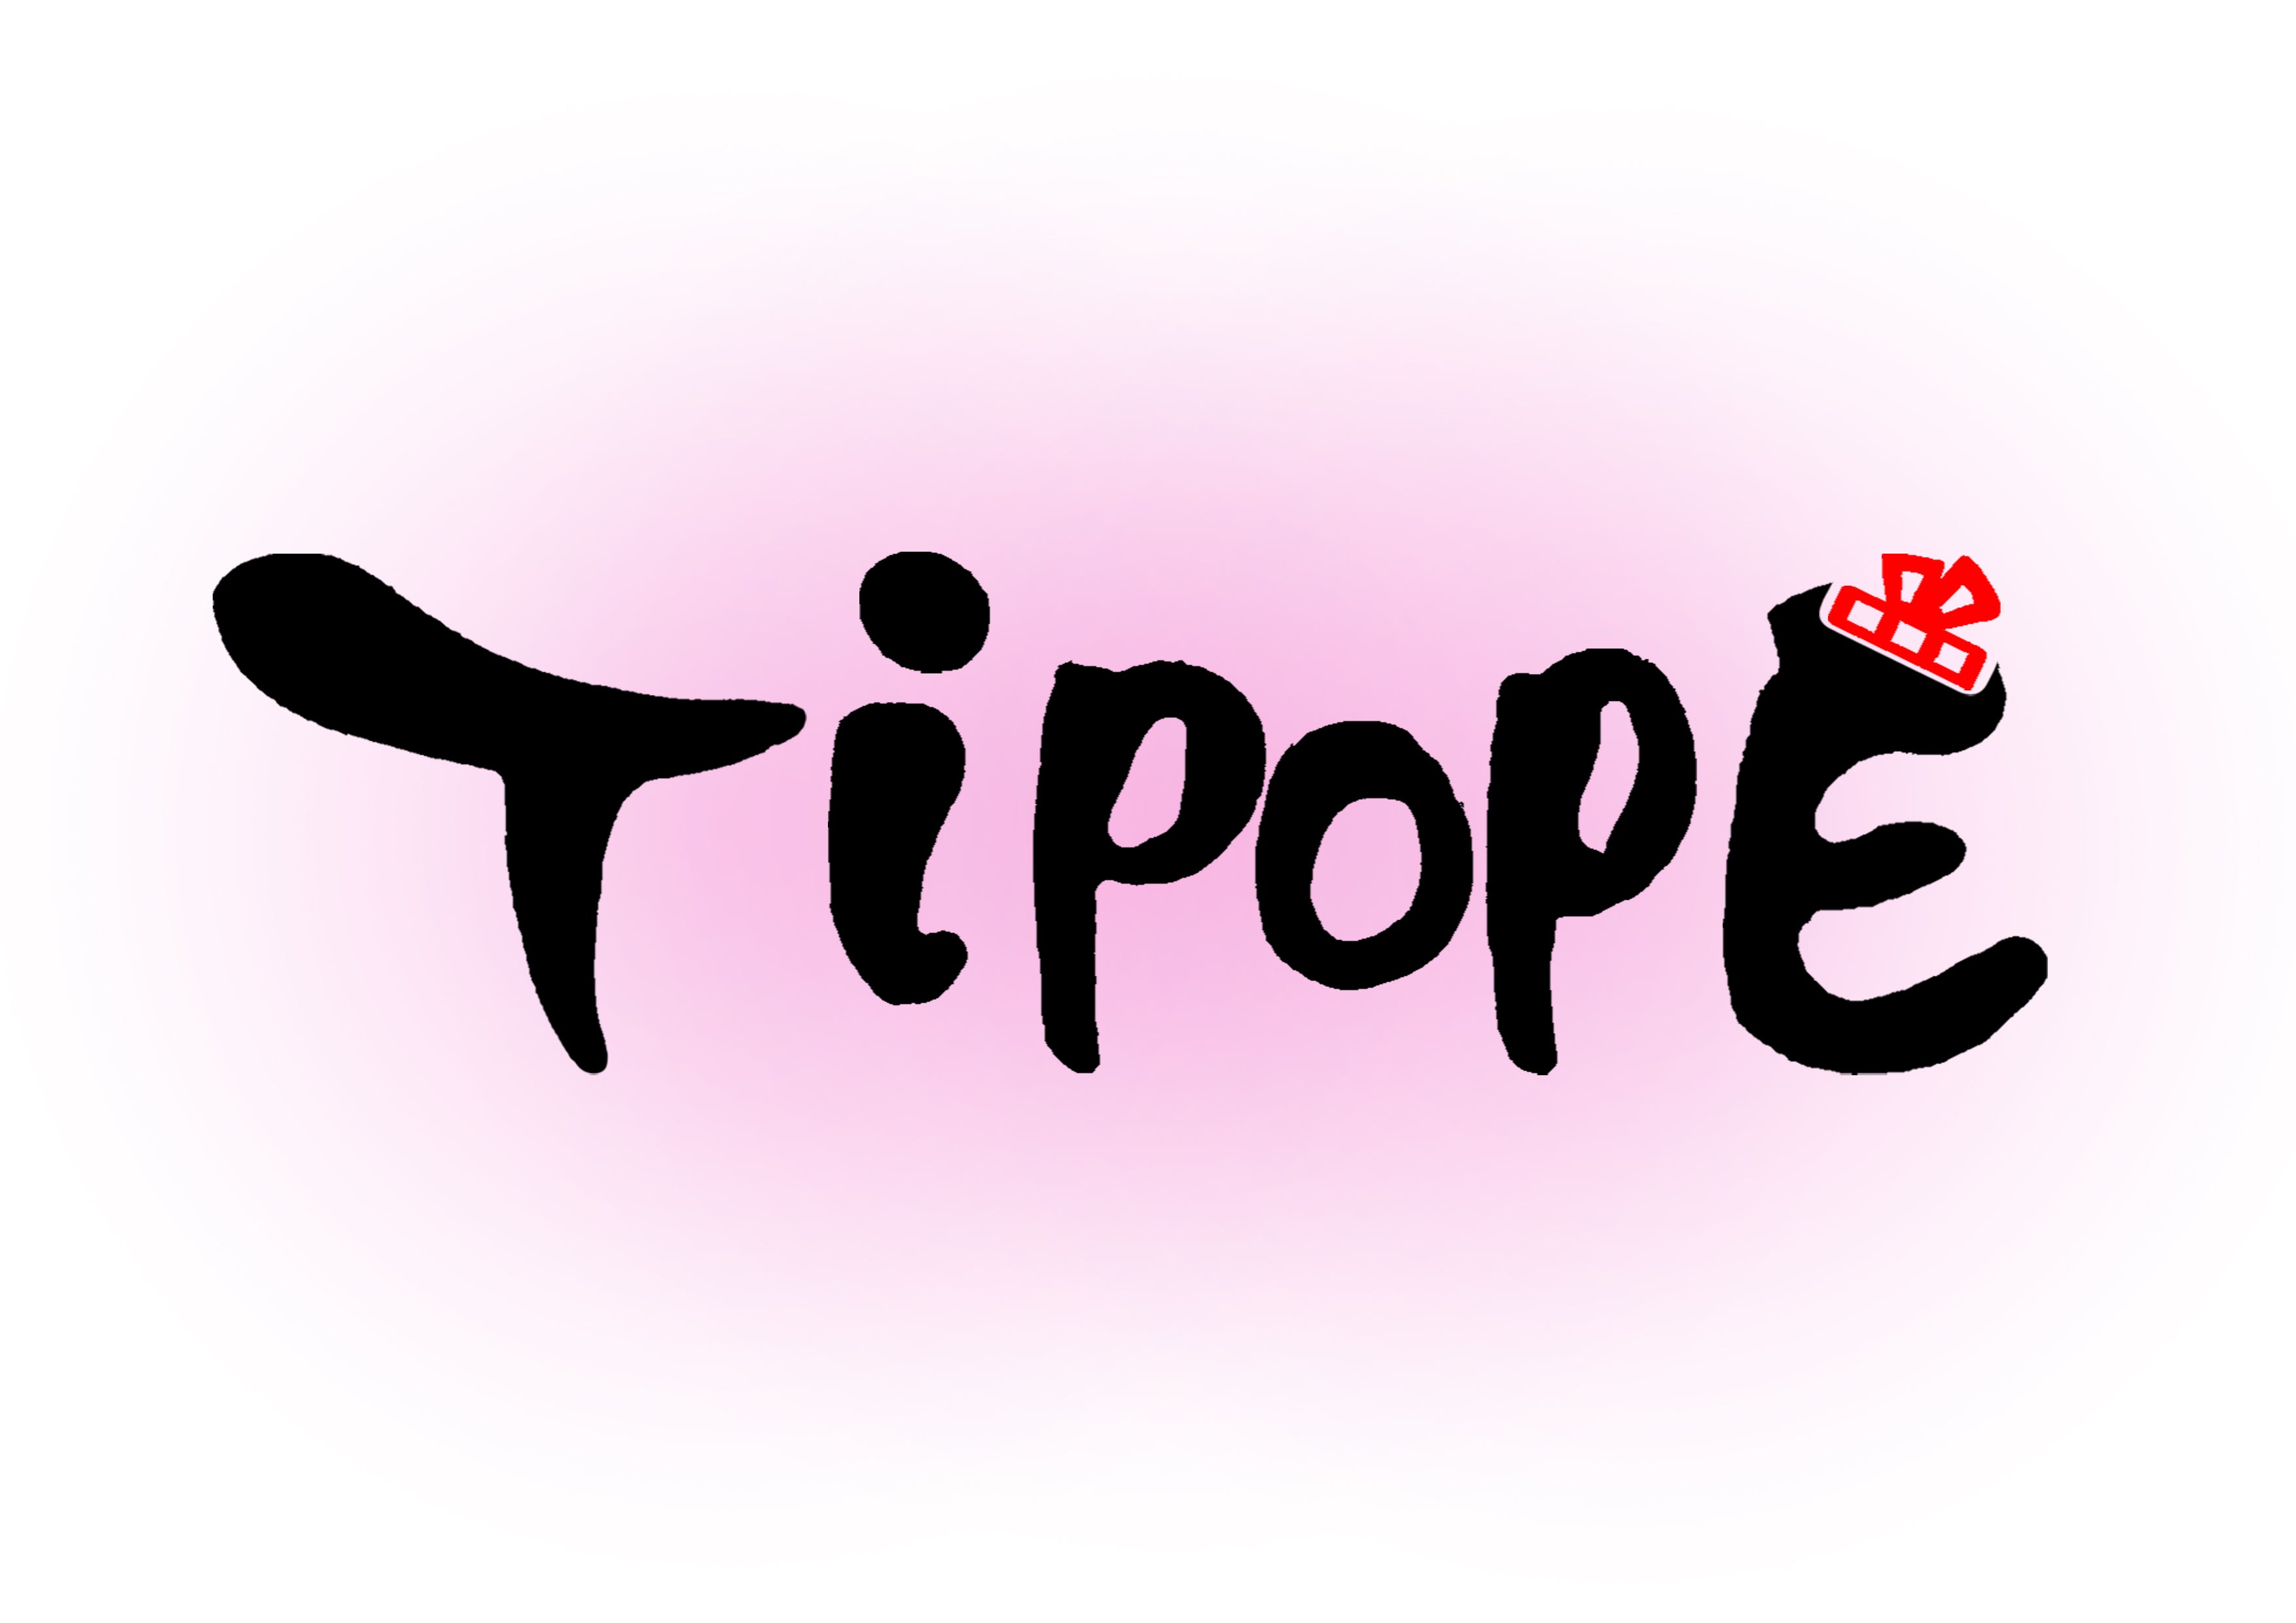 TIPOPE